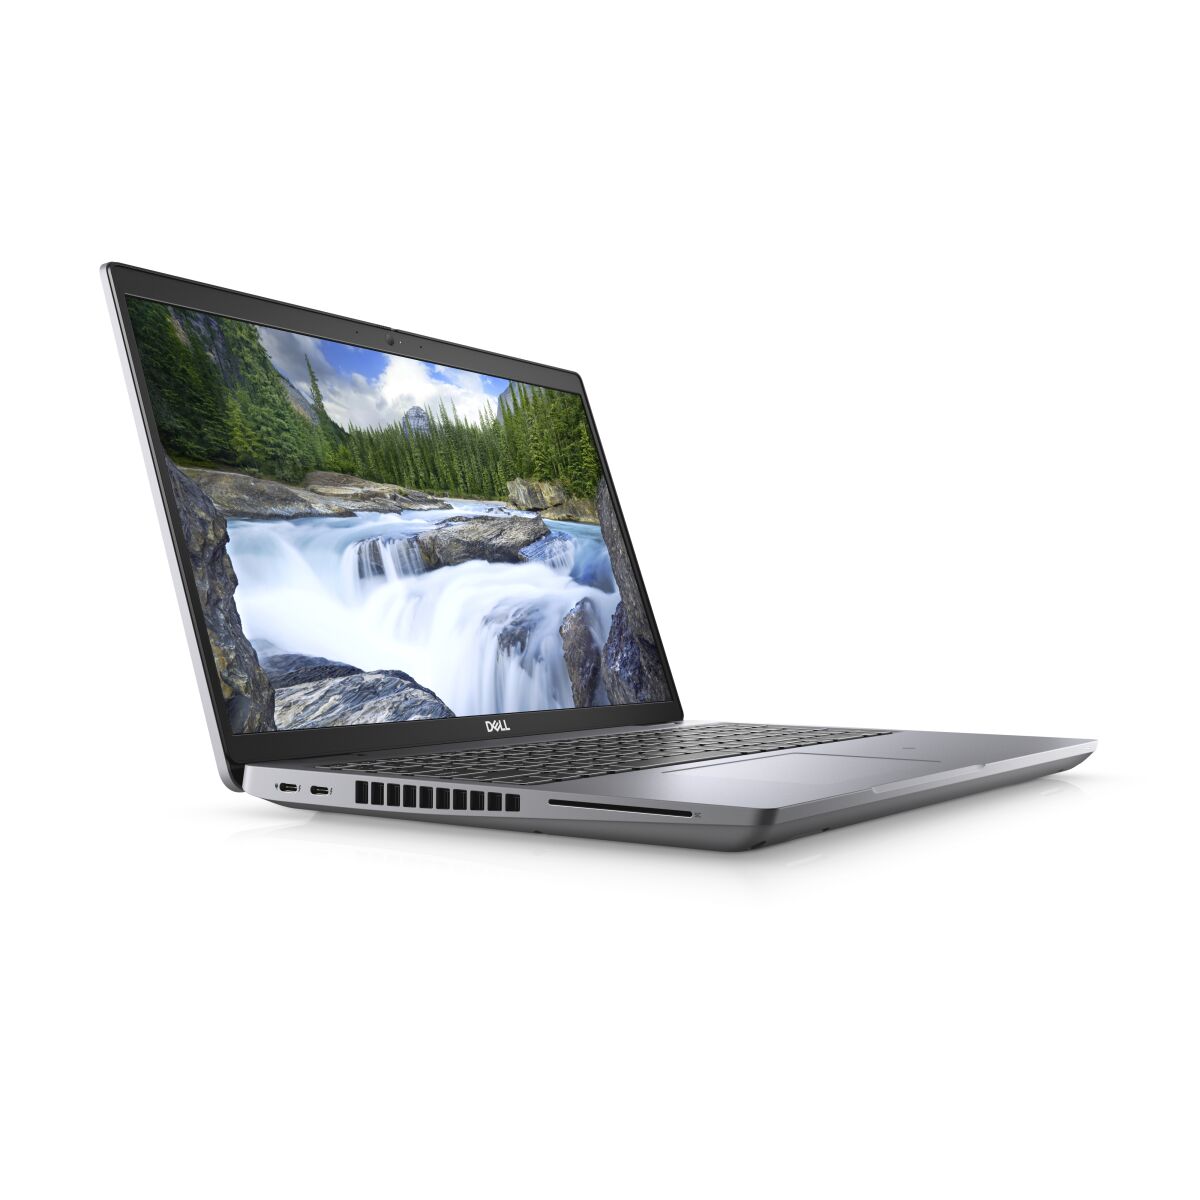 DELL Latitude 5521 - S007L552115US laptop specifications